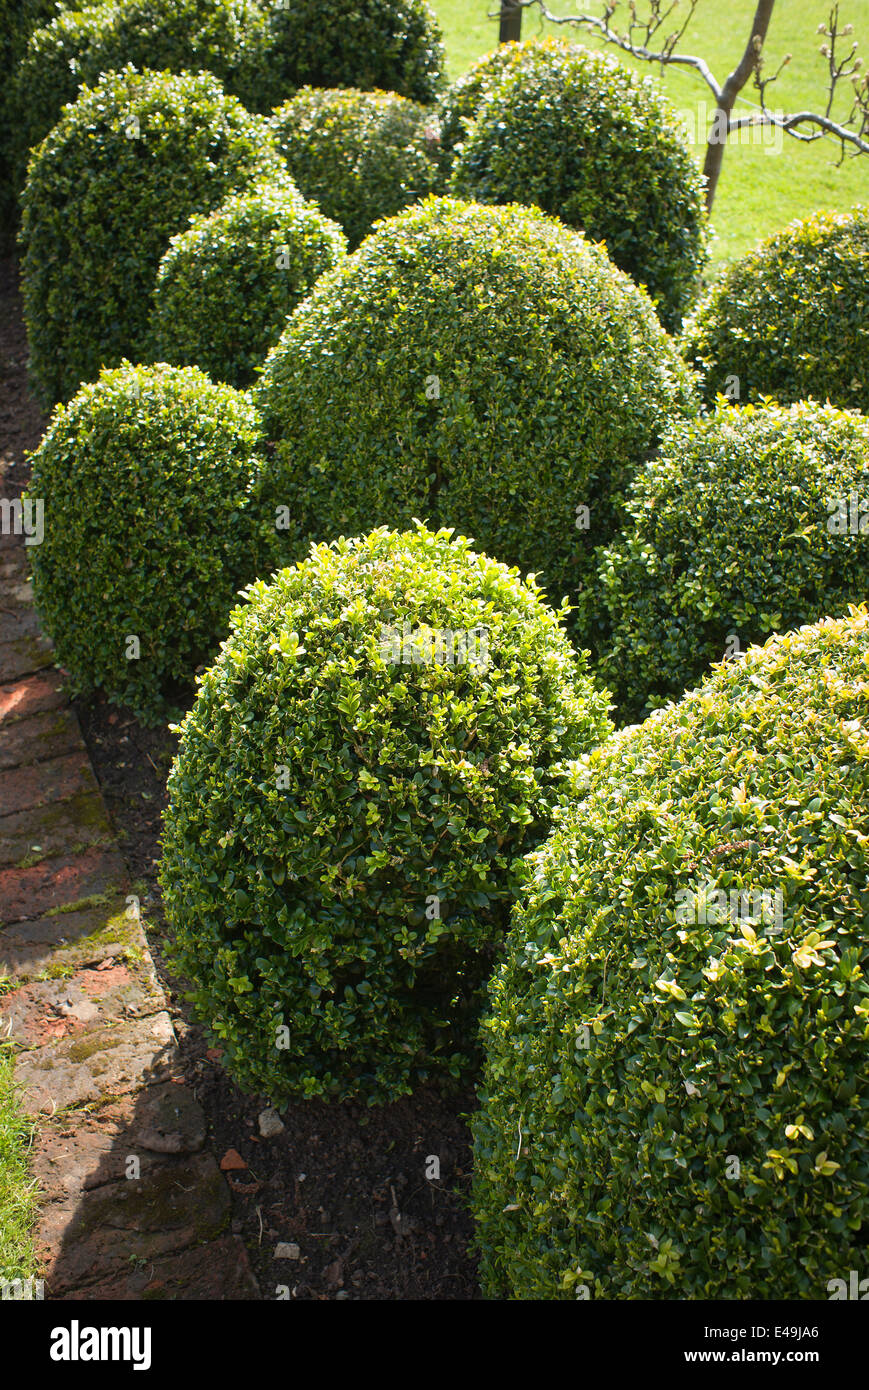 A colony of box bushes forming a garden feature in UK Stock Photo